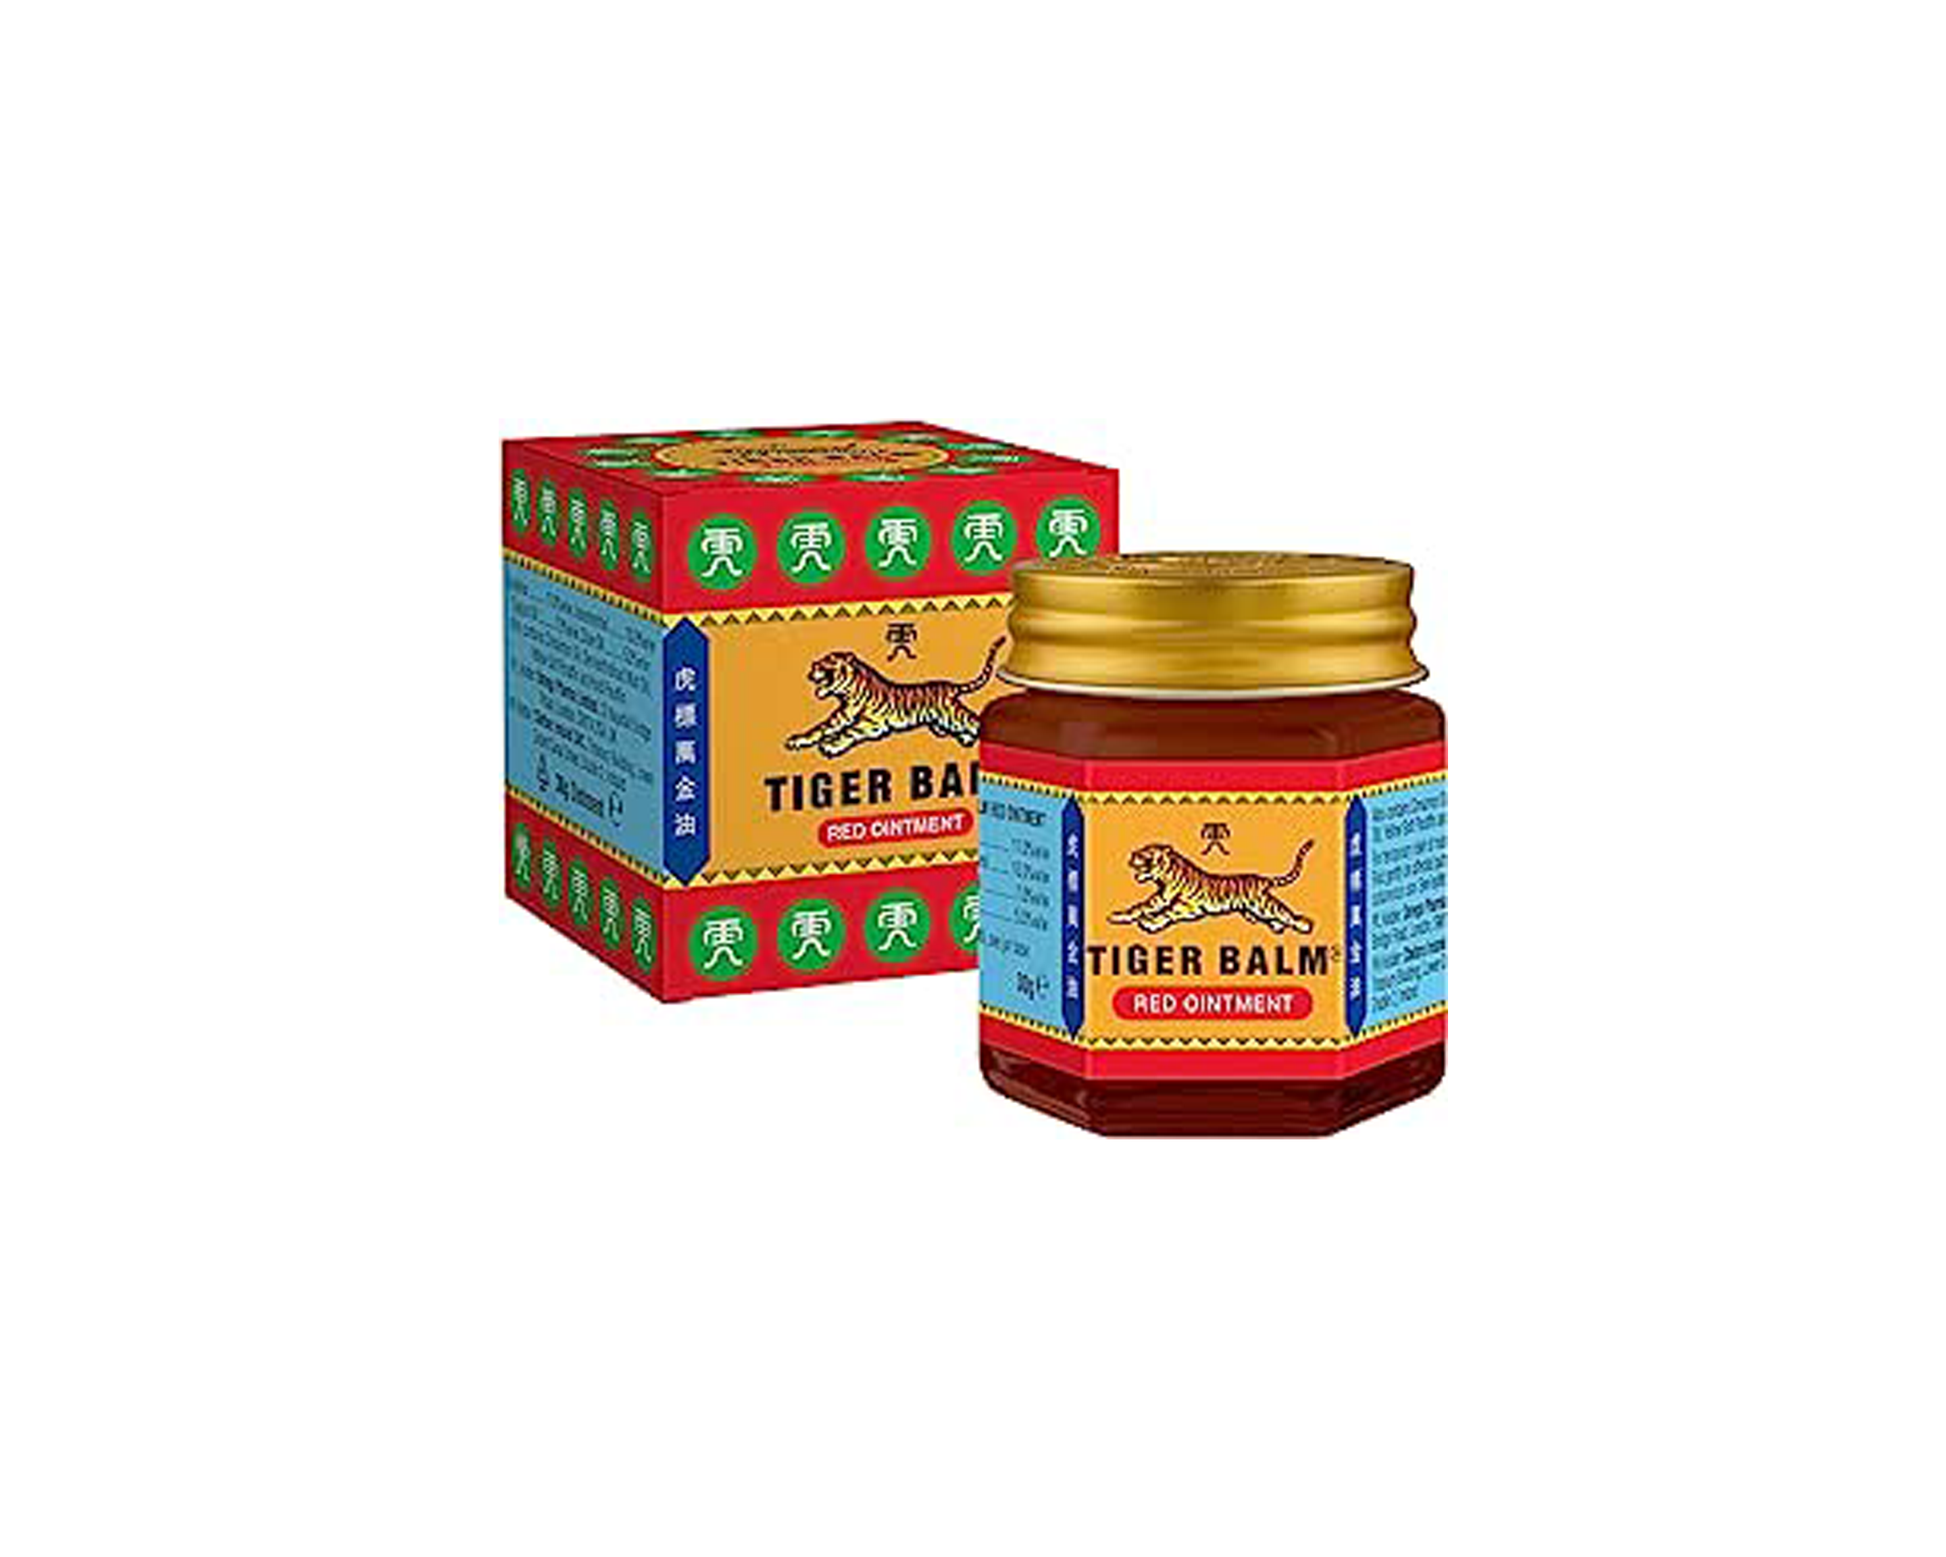 Tiger Balm 30g - Indian Spices